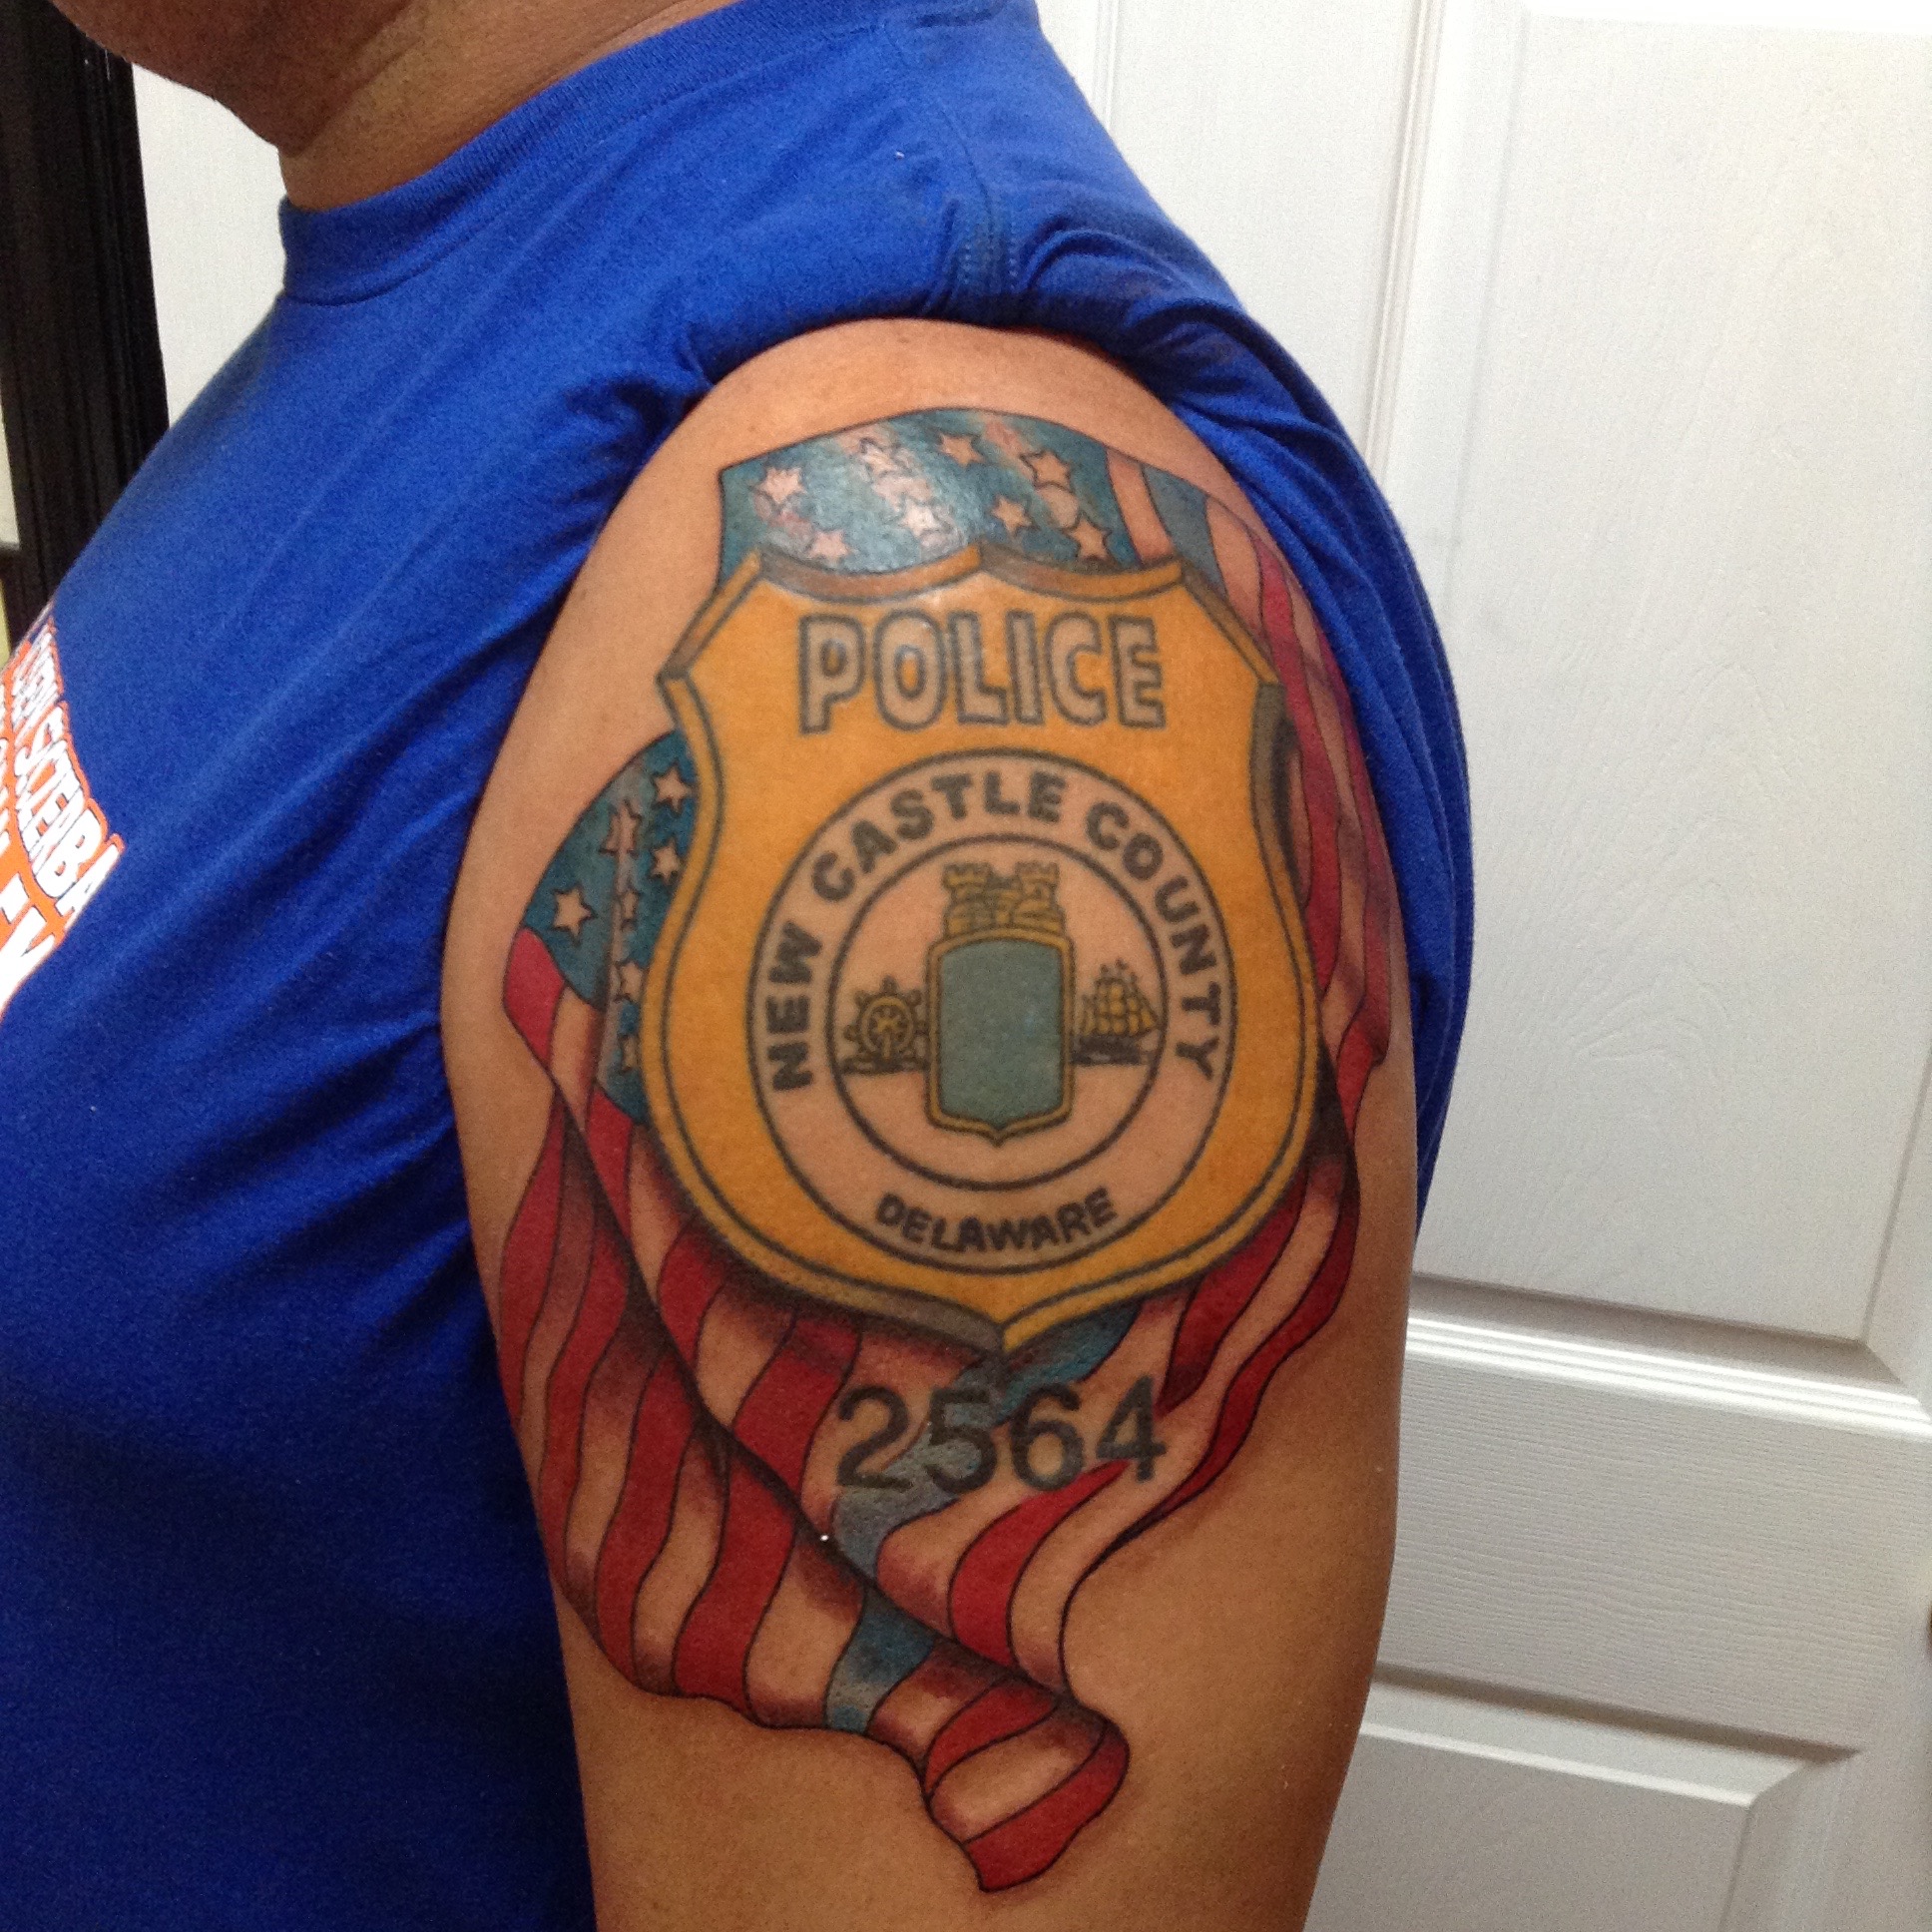 Ohio police department changes policy now allows officers to show tattoos   KATV